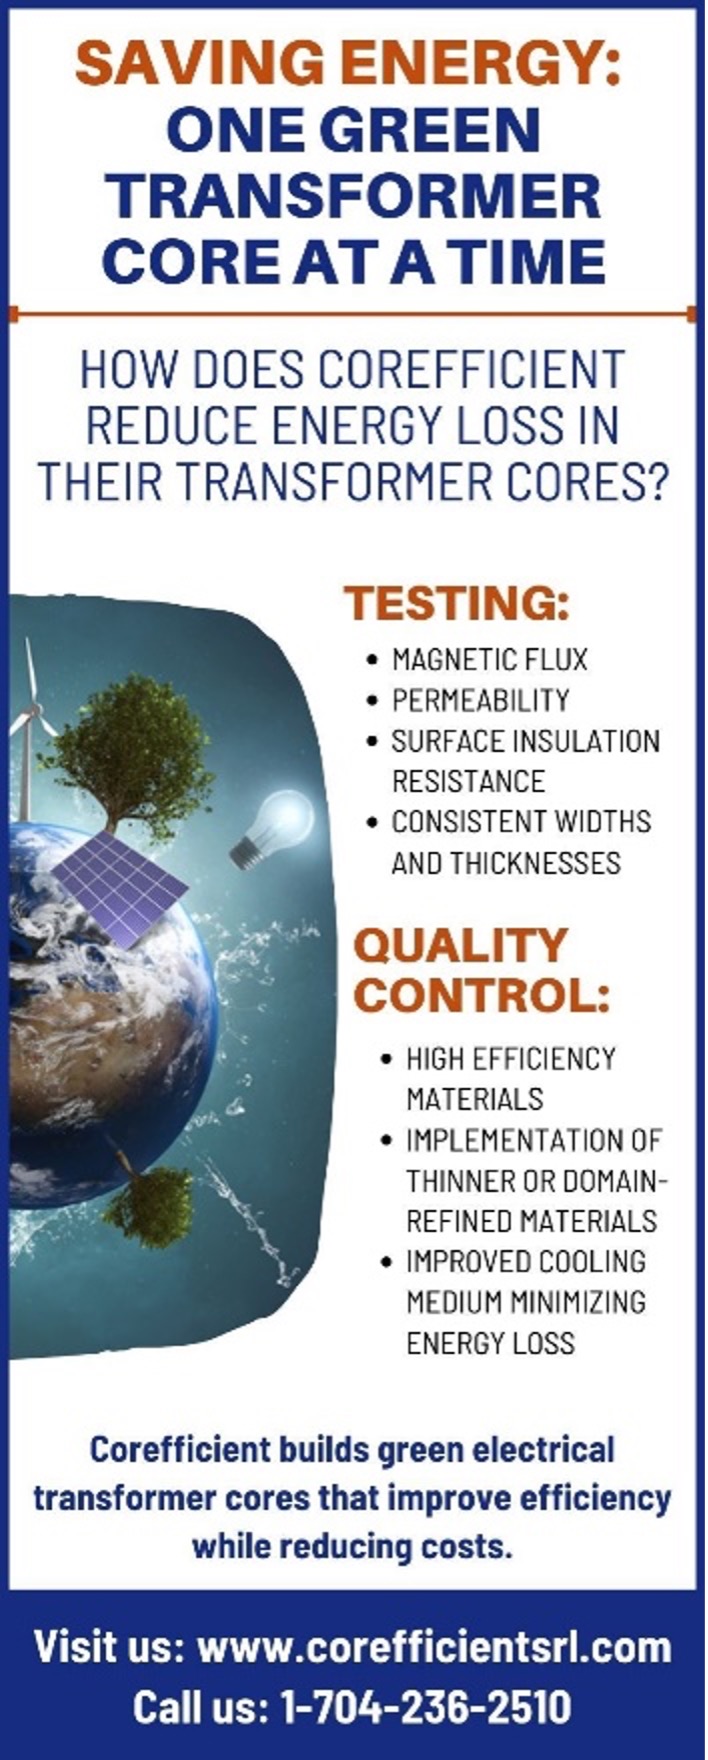 An infographic showing how Corefficient reduces energy loss in their transformer cores by testing and quality control. It has their contact details at the bottom and an attached image of Earth with electric generation equipment and trees on the left side.